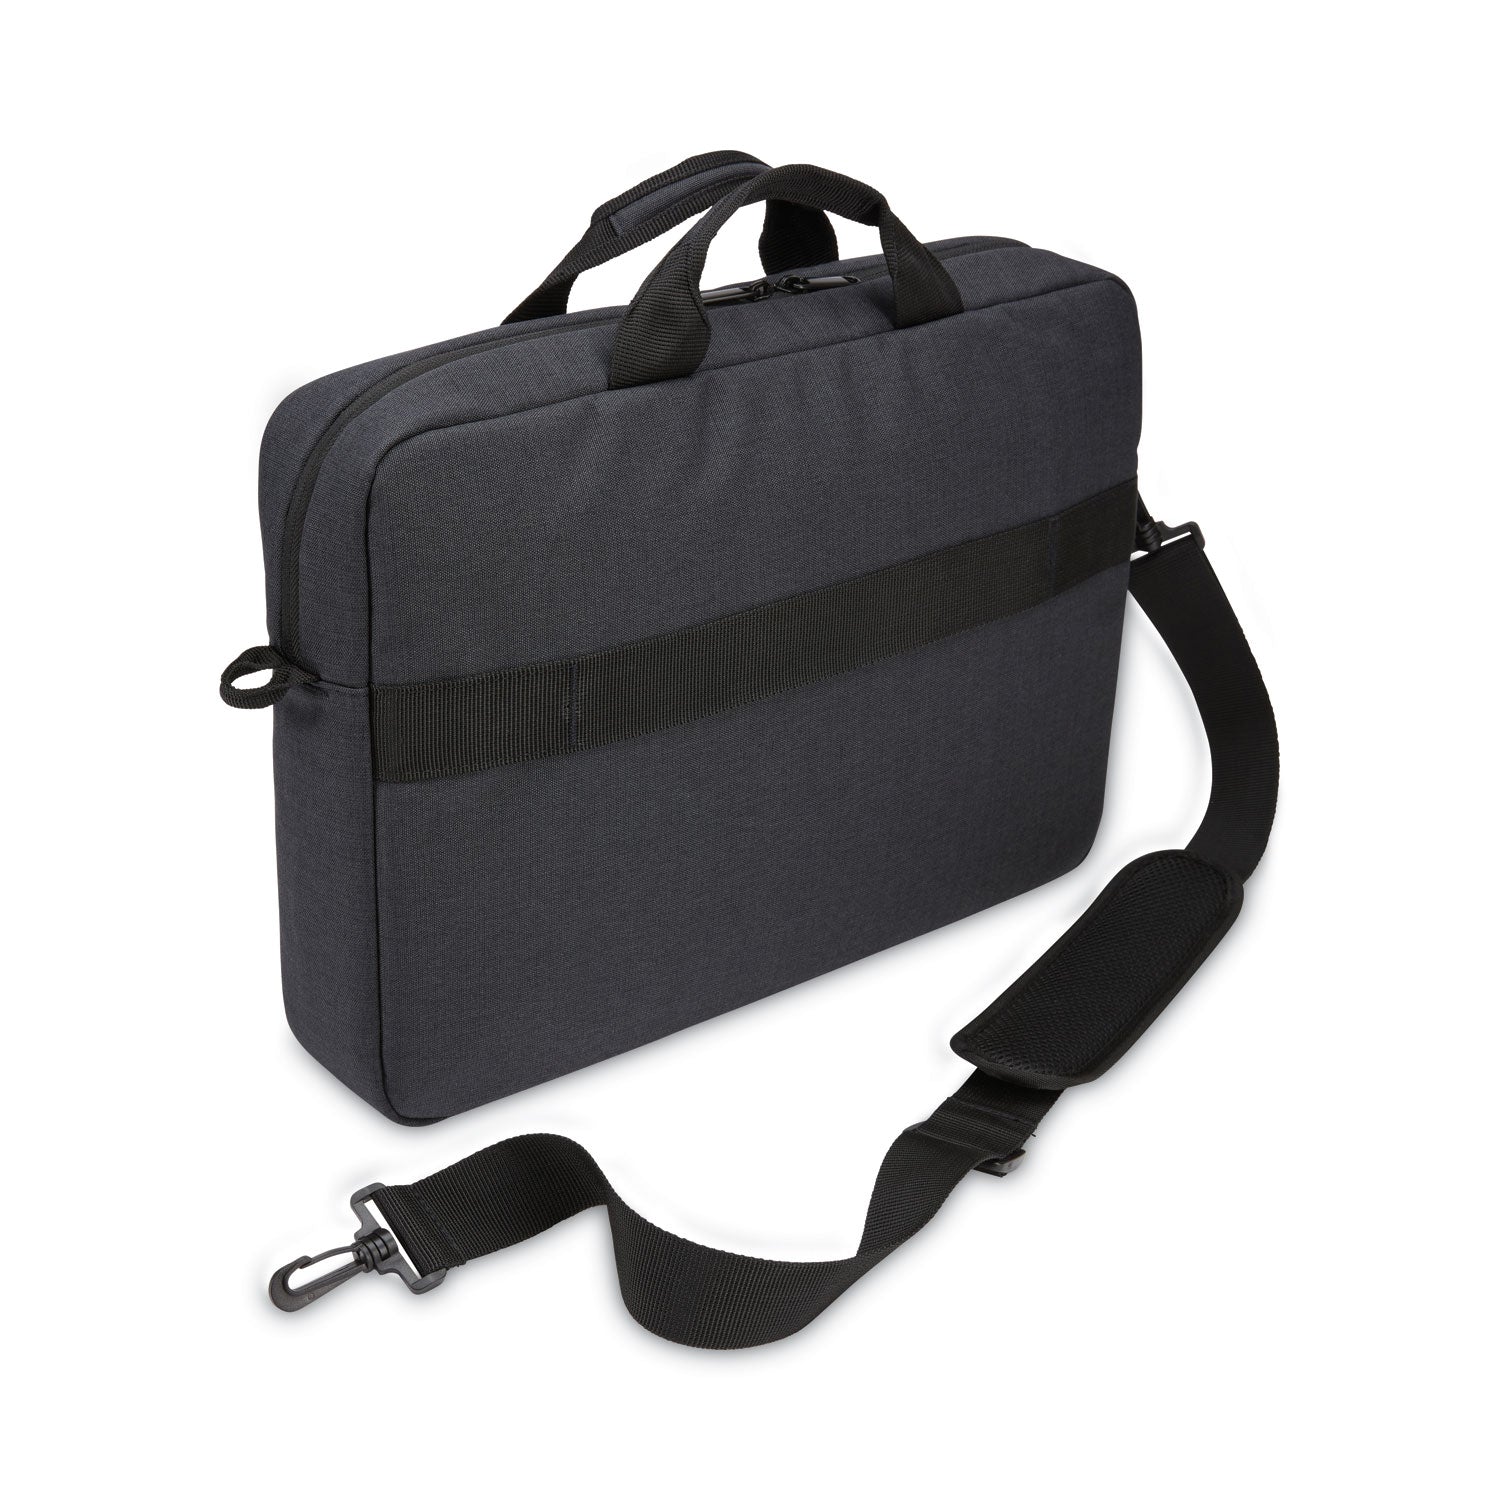 huxton-156-laptop-attache-fits-devices-up-to-156-polyester-163-x-28-x-124-black_clg3204653 - 4